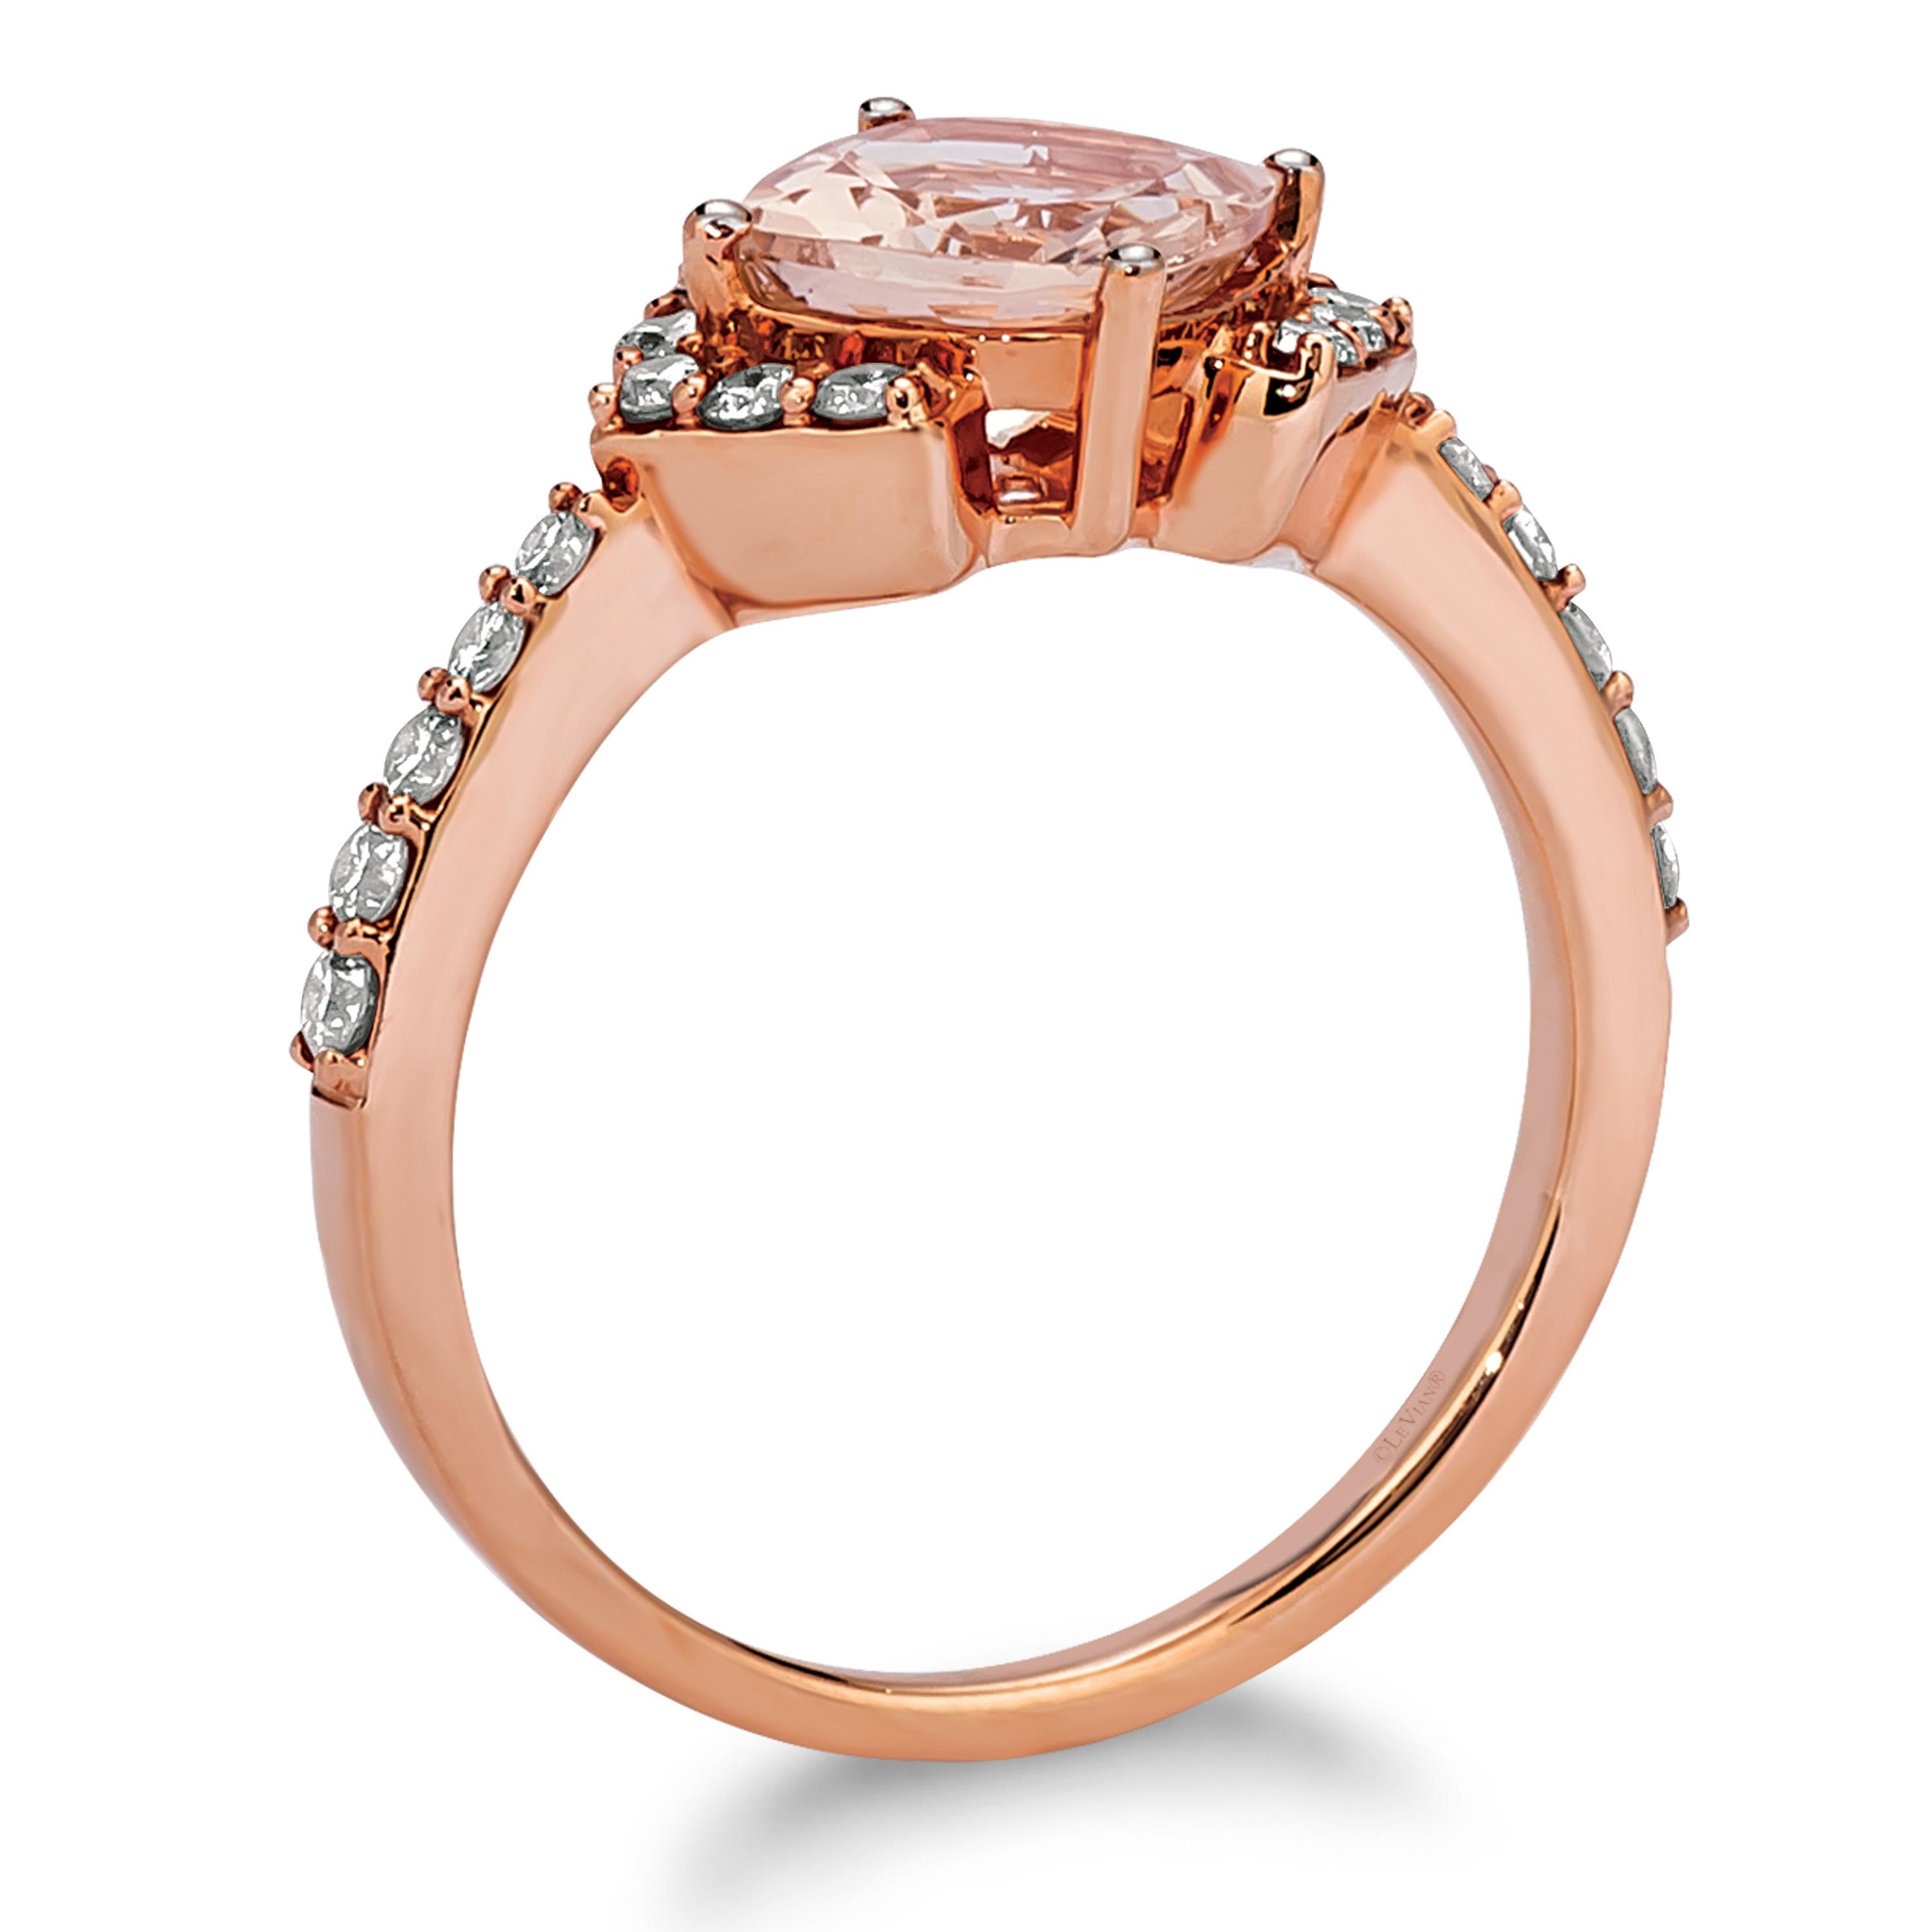 14k rose gold antique cushion cut csarite ring with chocolate diamond accents